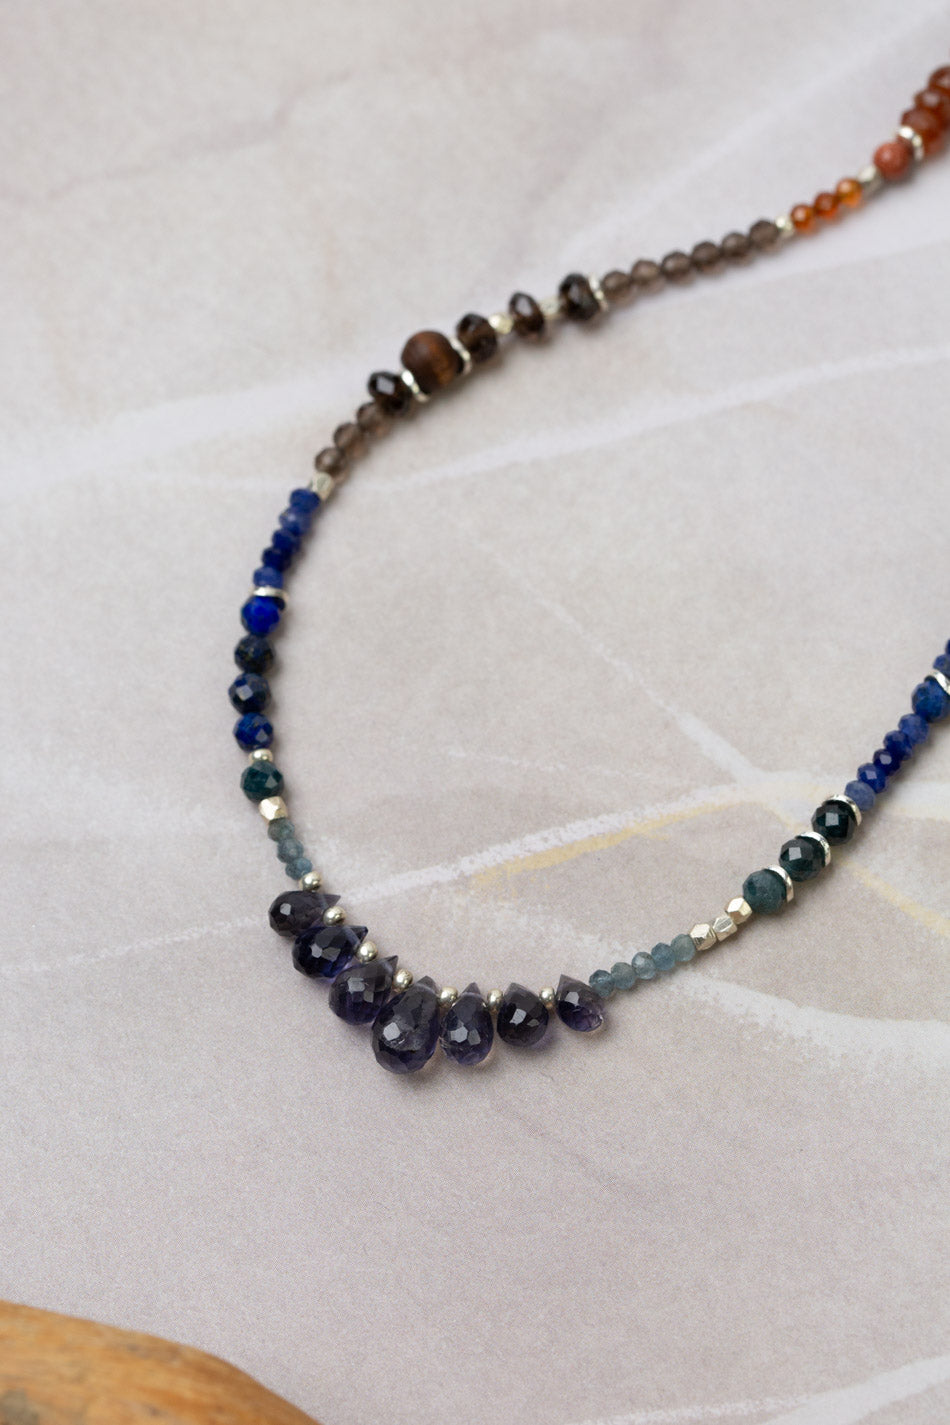 Limited Edition 16-18" Sapphire, Hessonite, Garnet, Lapis Lazuli With Iolite Droplet Briolettes Collage Necklace